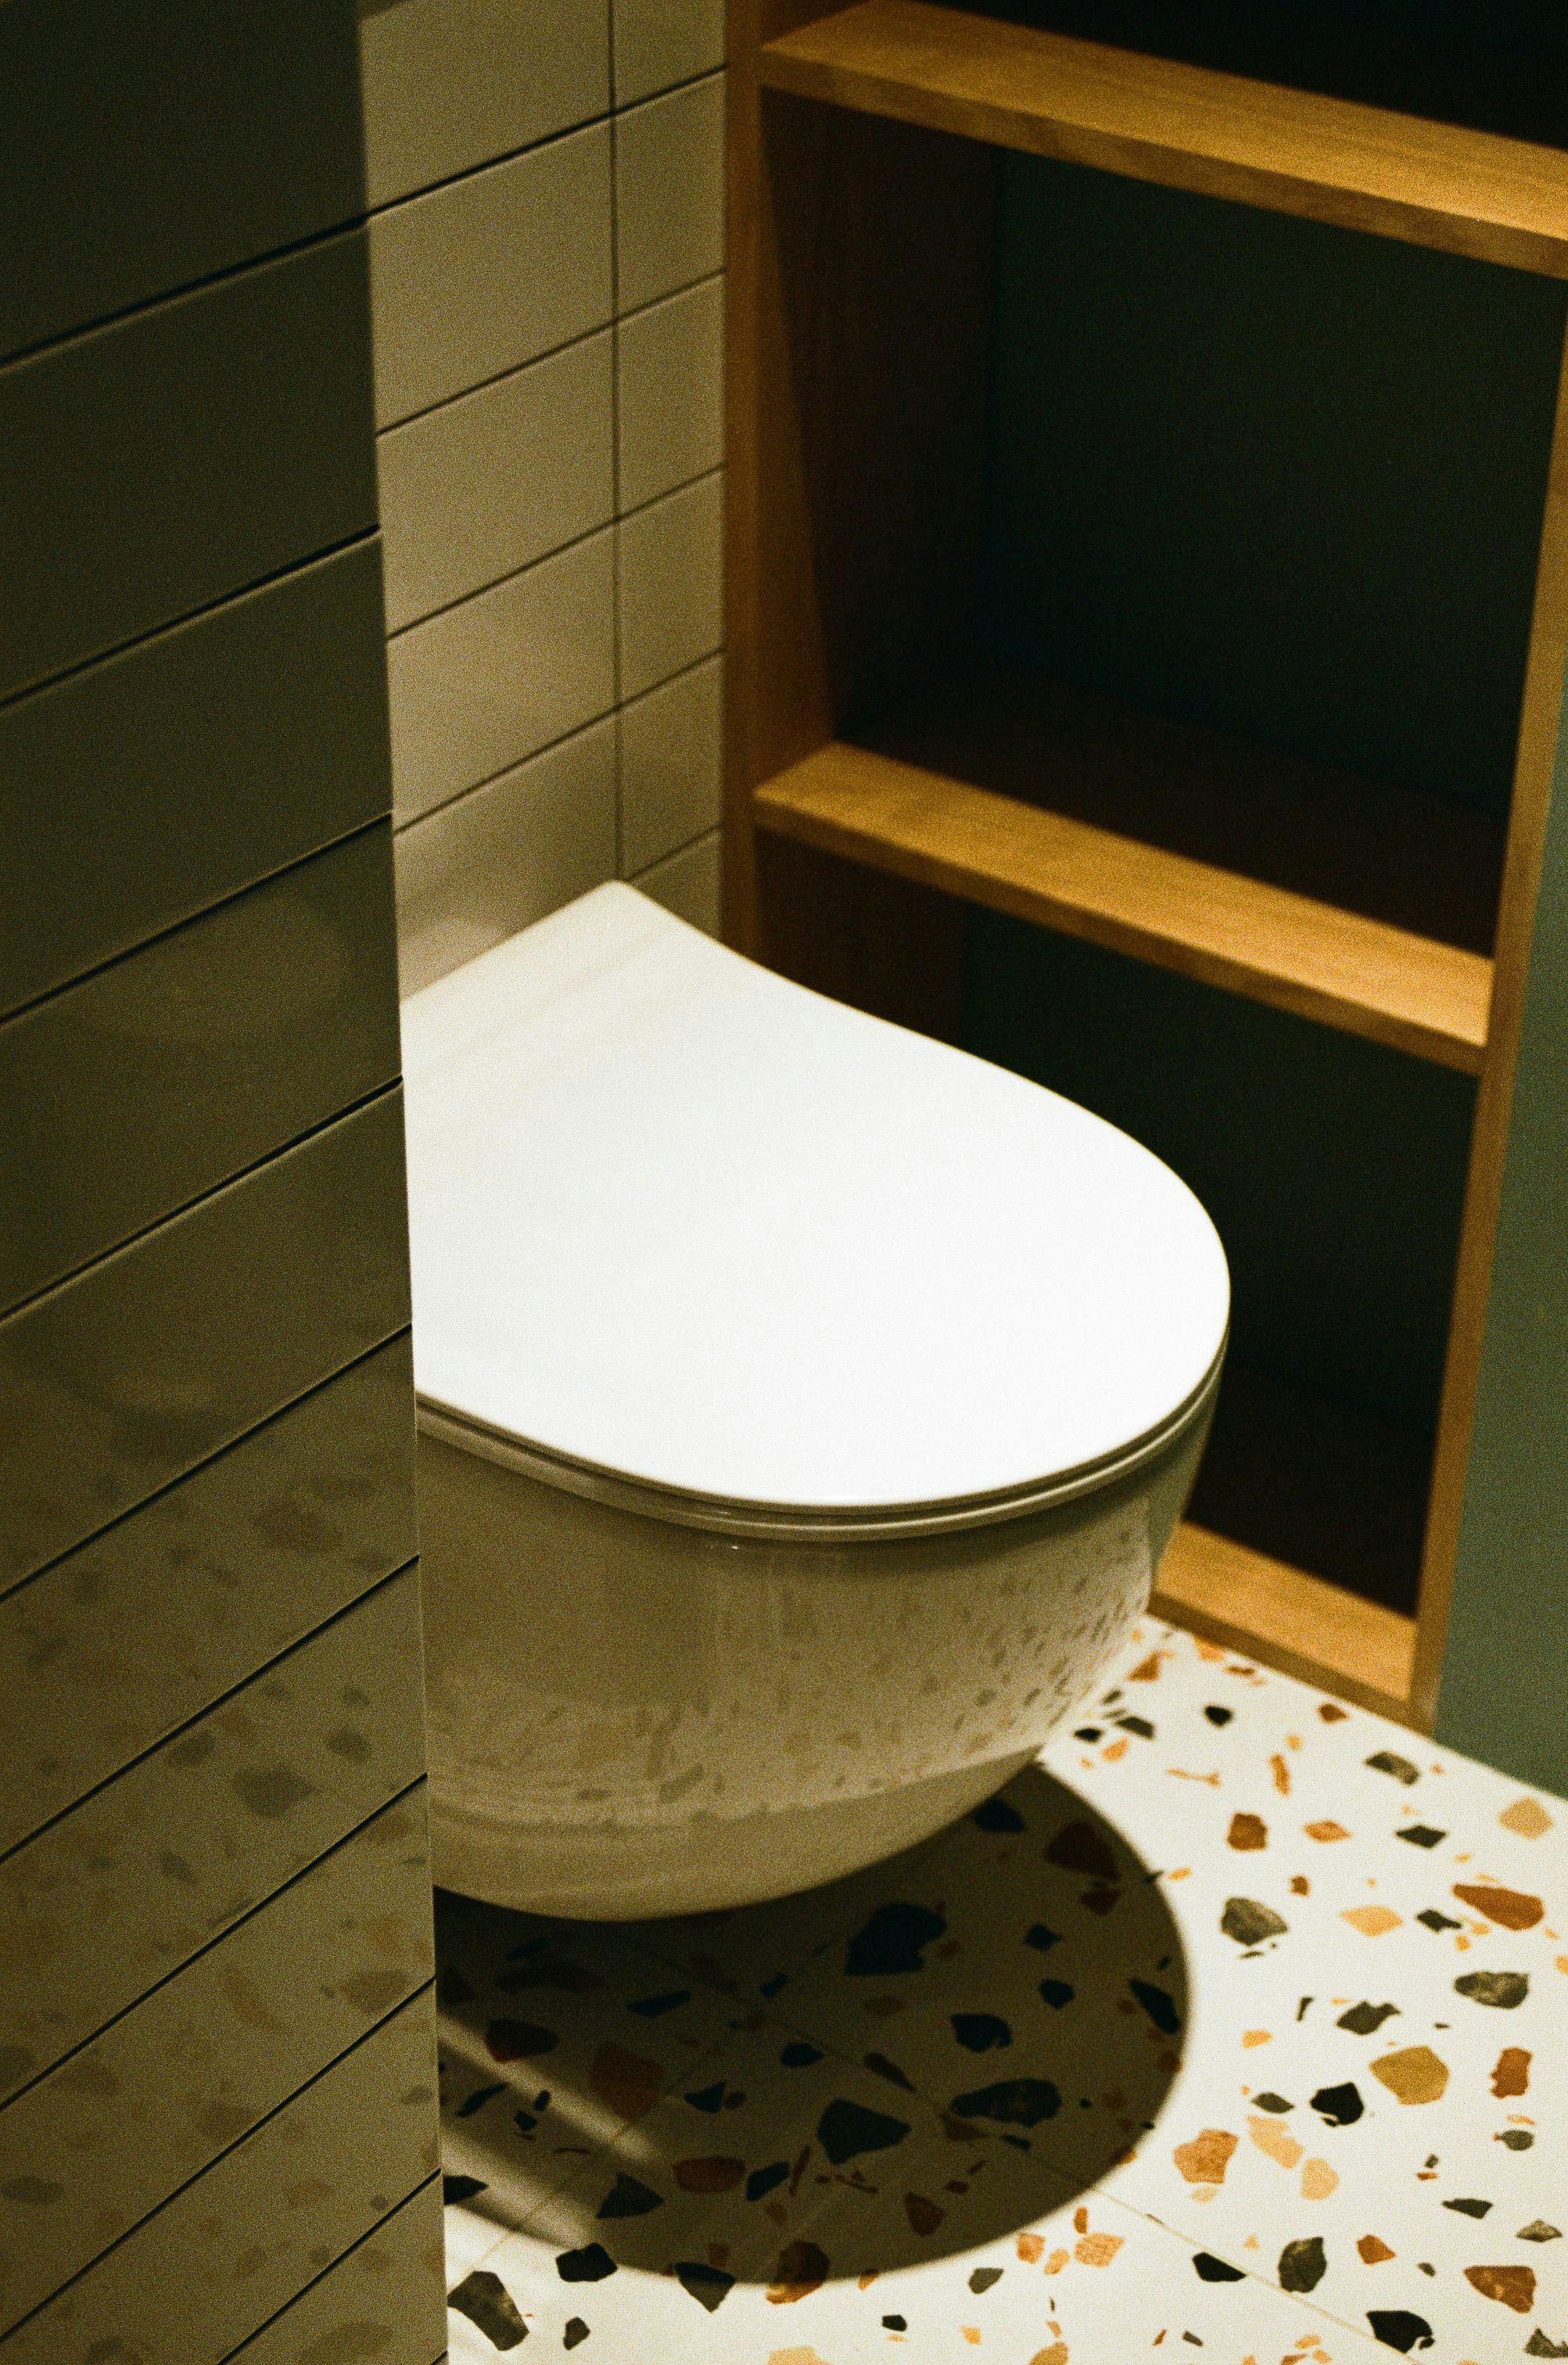 A modern white self-cleaning toilet for a cleaner bathroom experience